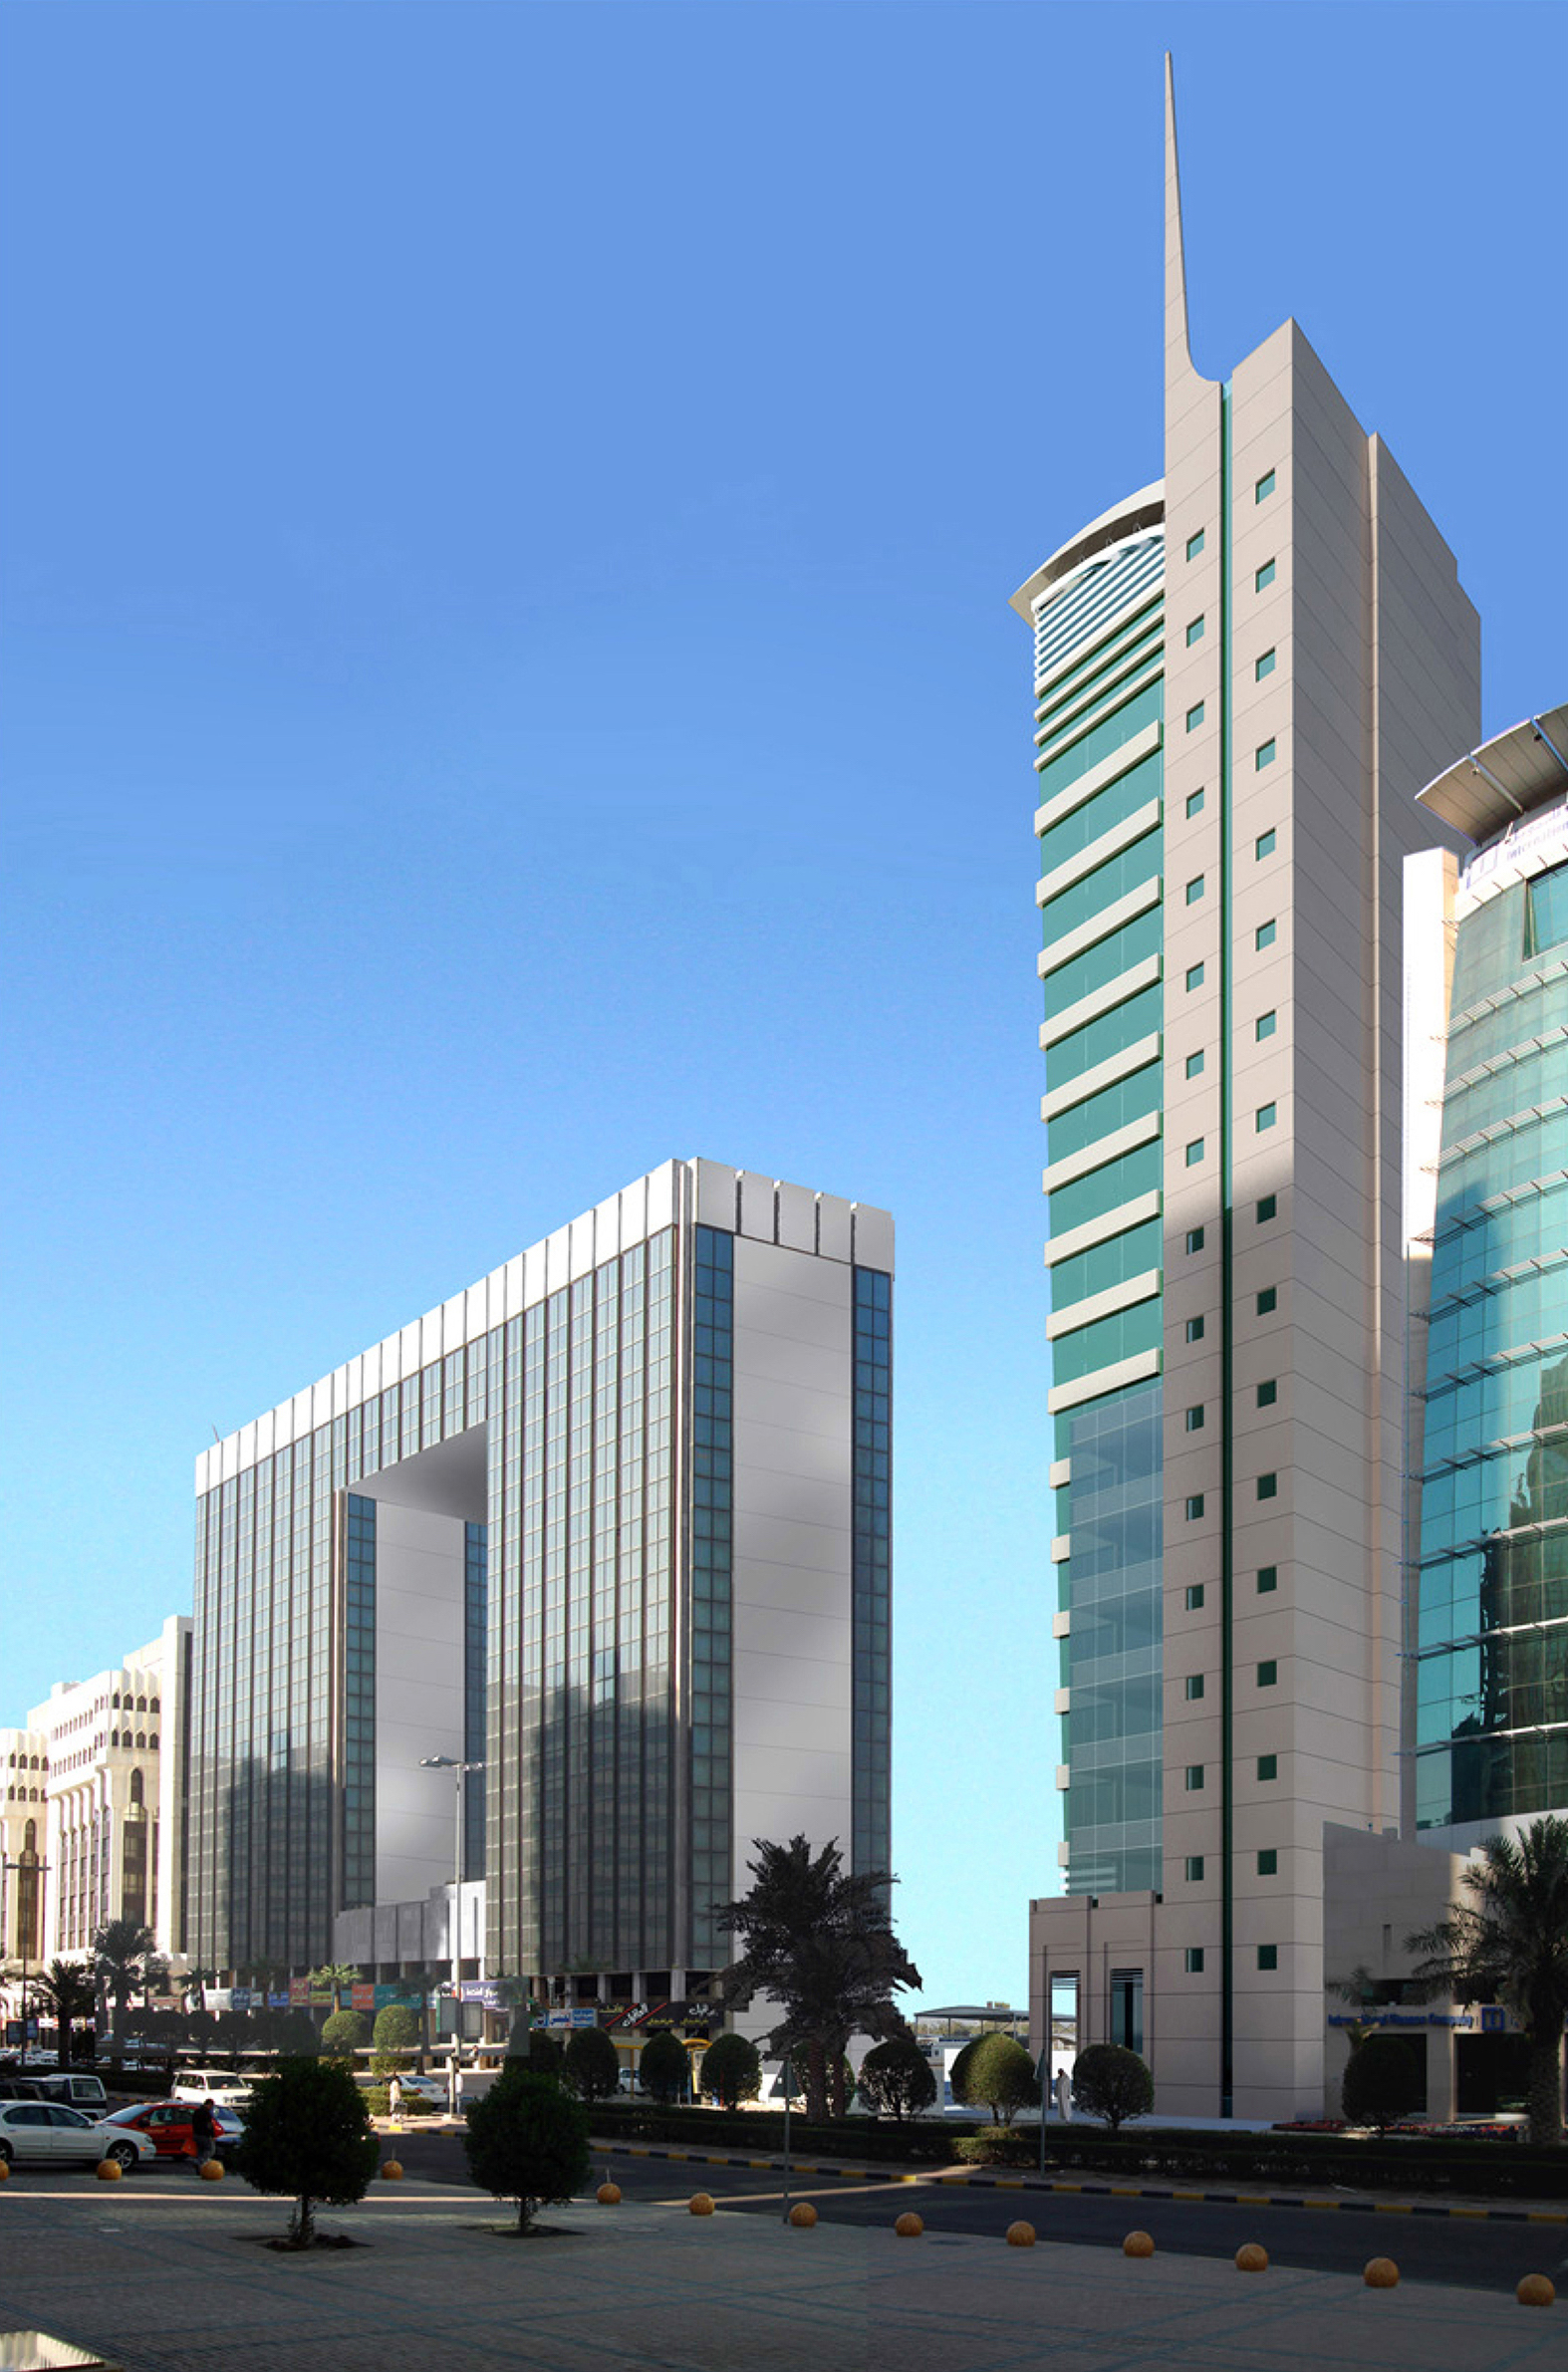 RAED TOWER EXTENSION